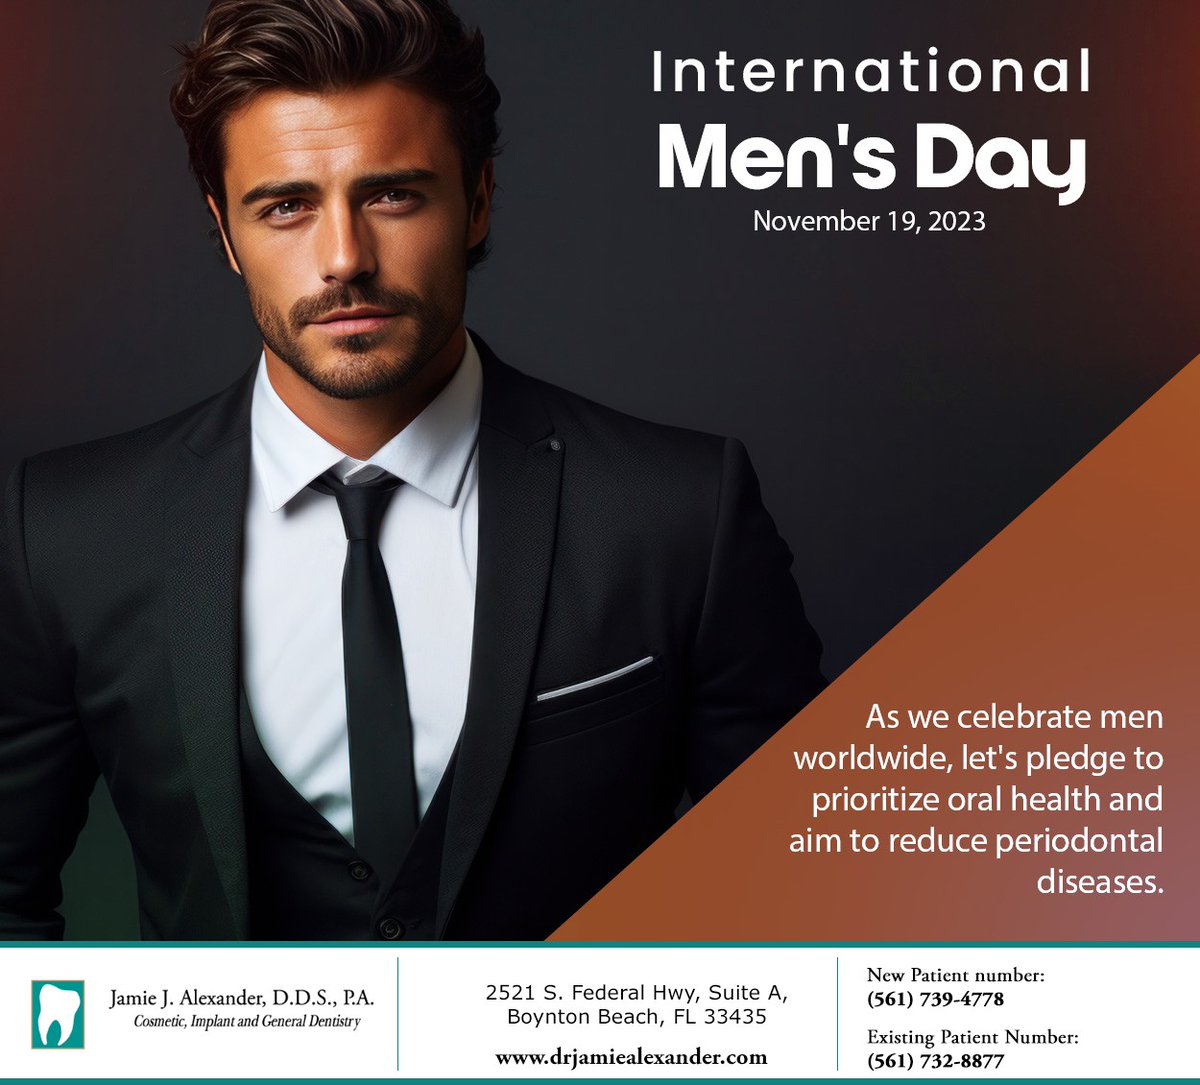 International Men's Day is ideal to raise awareness of the higher periodontal diseases in men. Prioritize oral health and reduce gum diseases; Jamie J. Alexander, D.D.S., PA, can help. #internationalmensday #periodontaldisease #JamieJAlexanderDDSPA #BoyntonBeach #FL